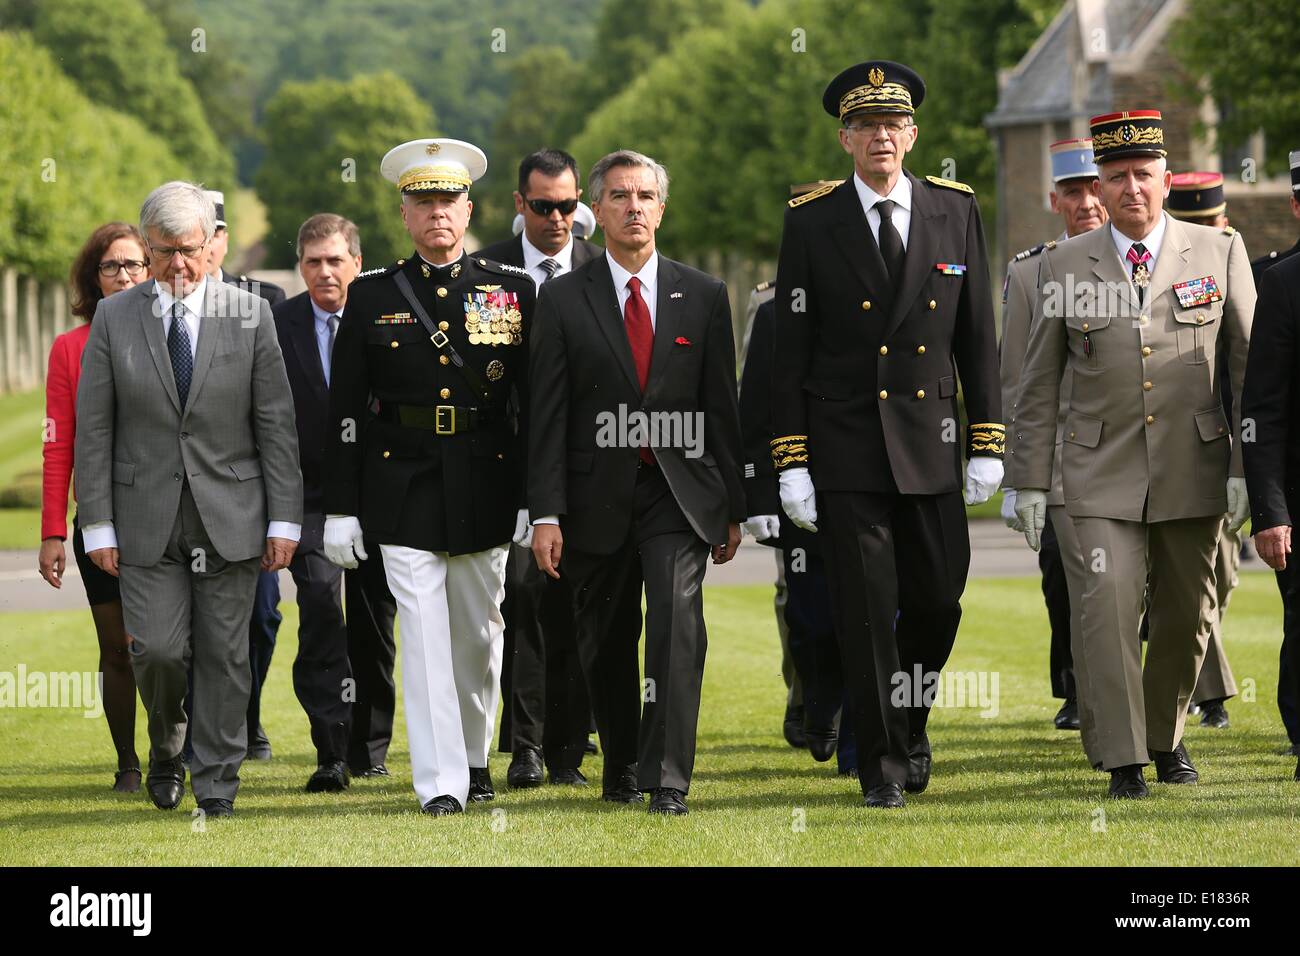 The Commandant of the Marine Corps, General James F. Amos and other American and French dignitaries arrive at the Aisne-Marne American Cemetery to commemorate the Battle of Belleau Wood and Memorial Day May 24, 2014 in Belleau, France. Stock Photo